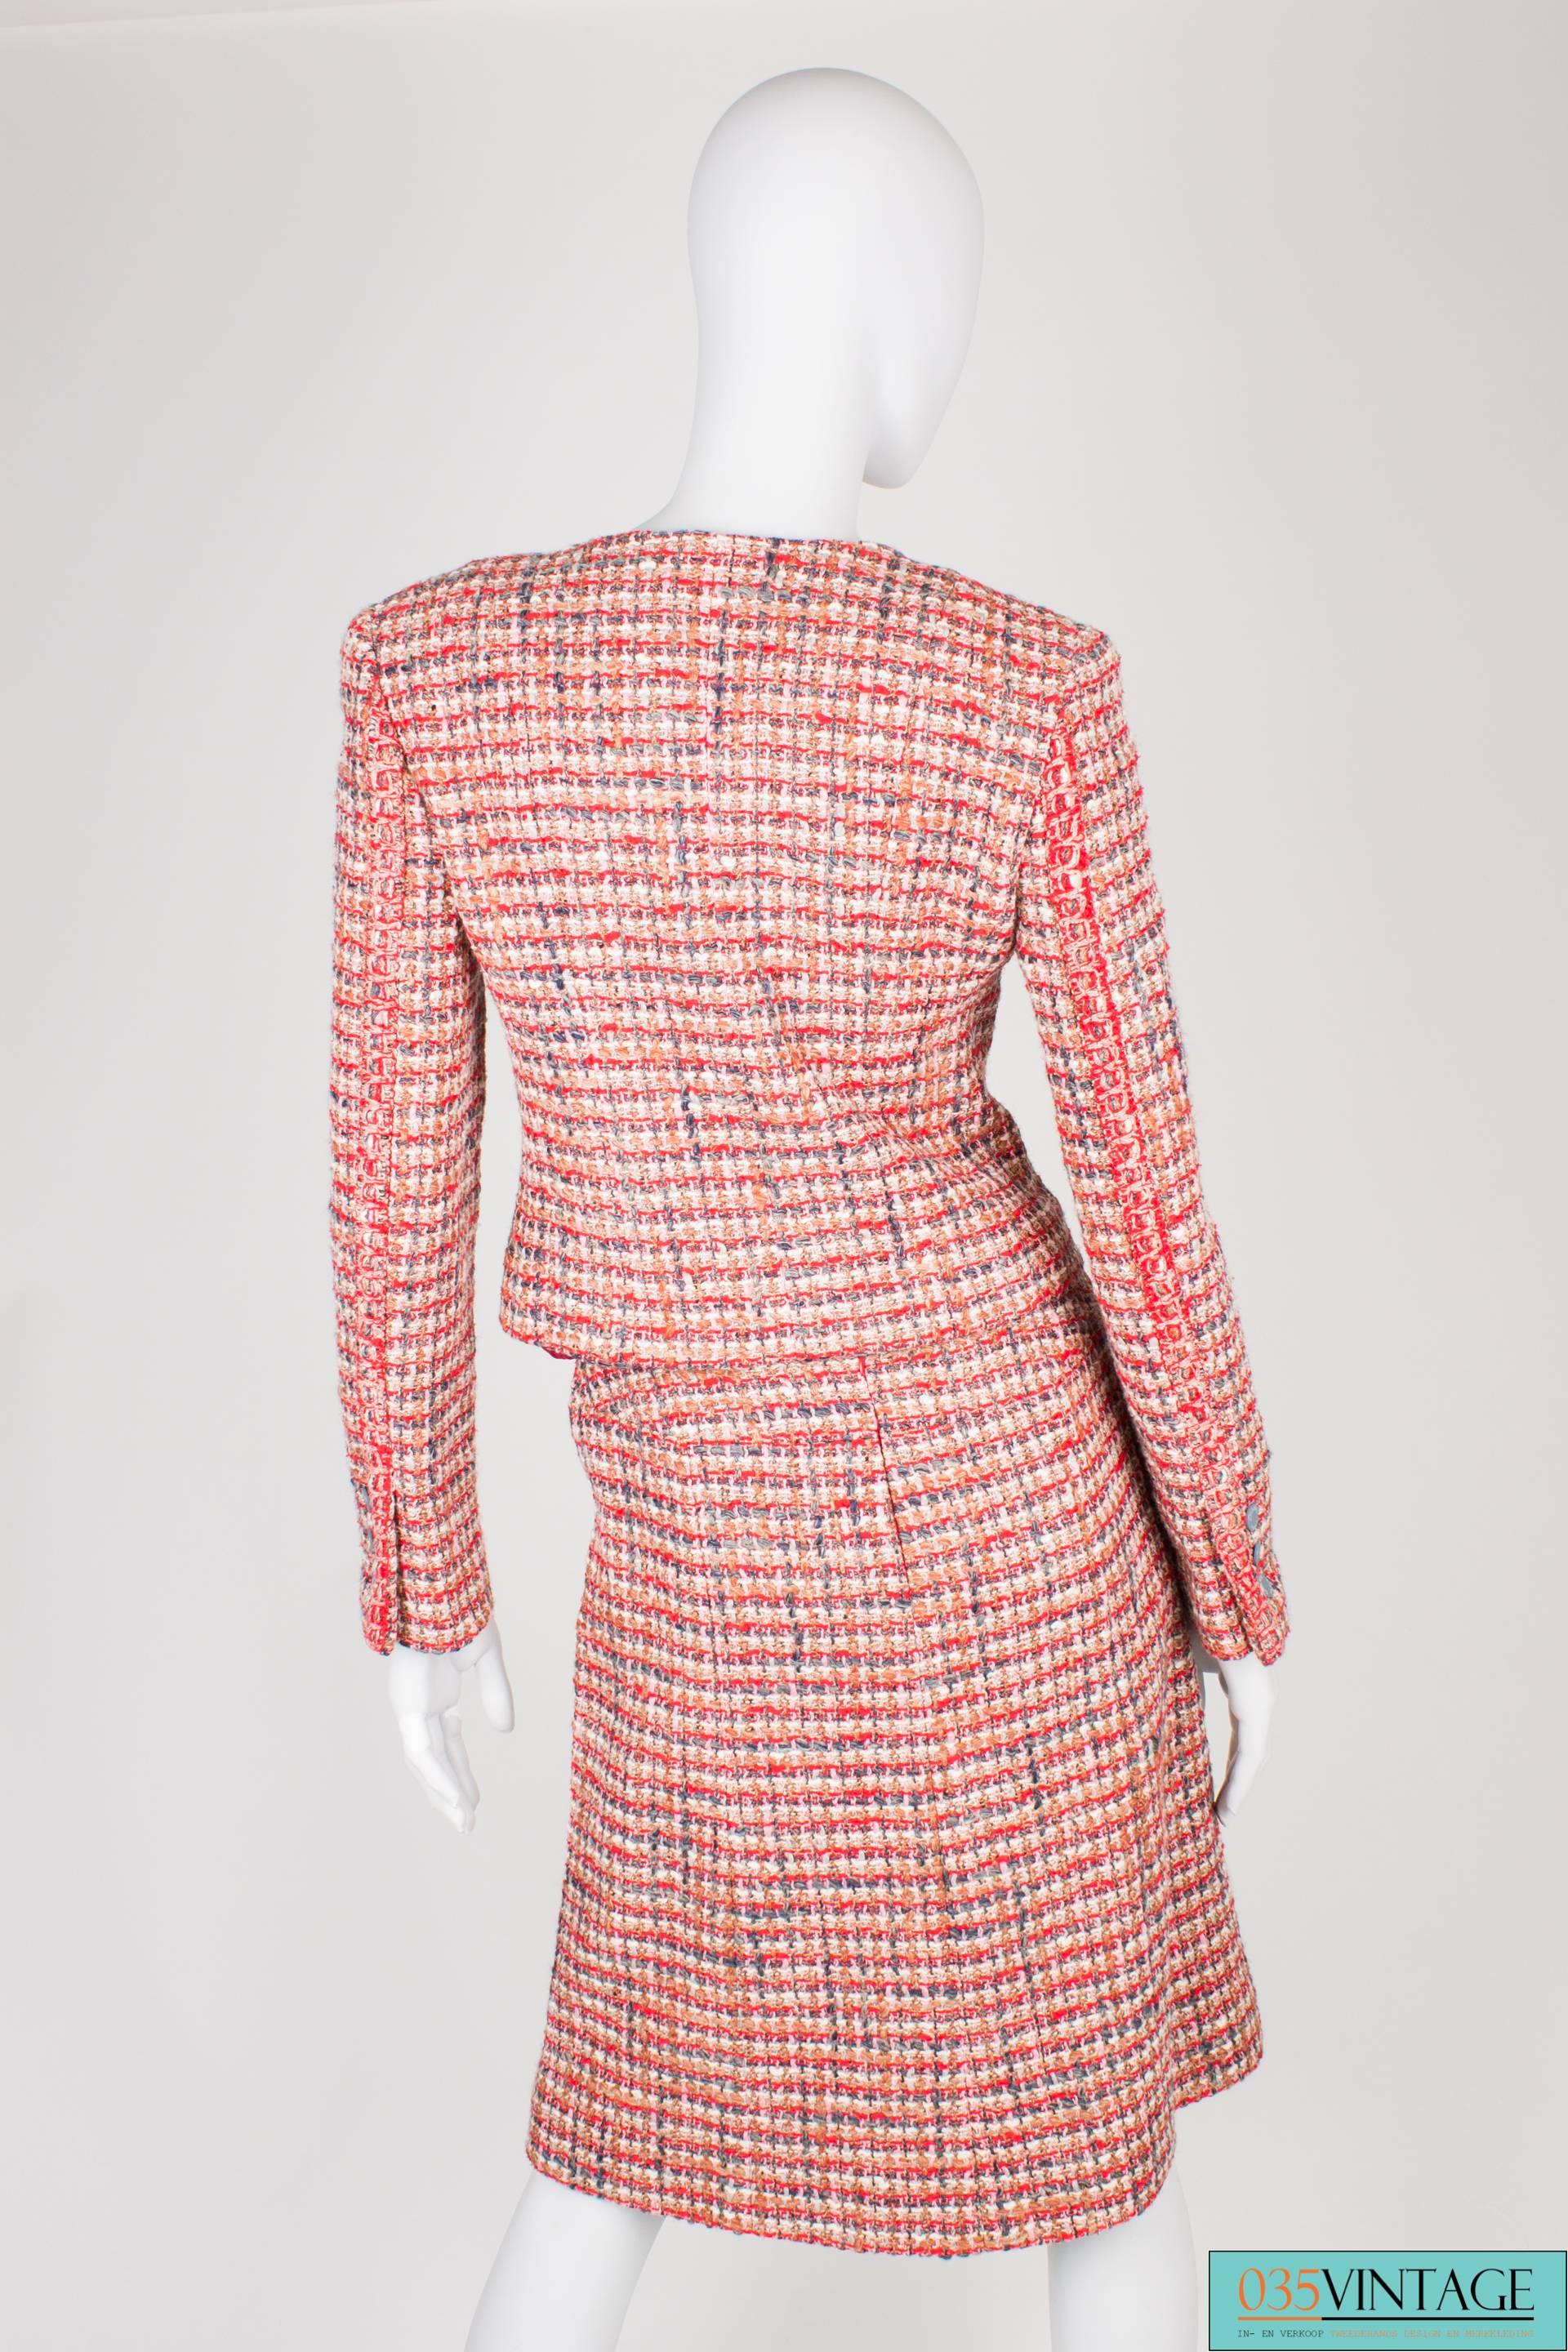 Stylish Chanel suit in a nice and warm color scheme; red, pink, gray,brown and white.

The short jacket has a rond collar and zip closure at the front. Two little patch pockets. At the end of the sleeves three gray buttons, stamped with the words